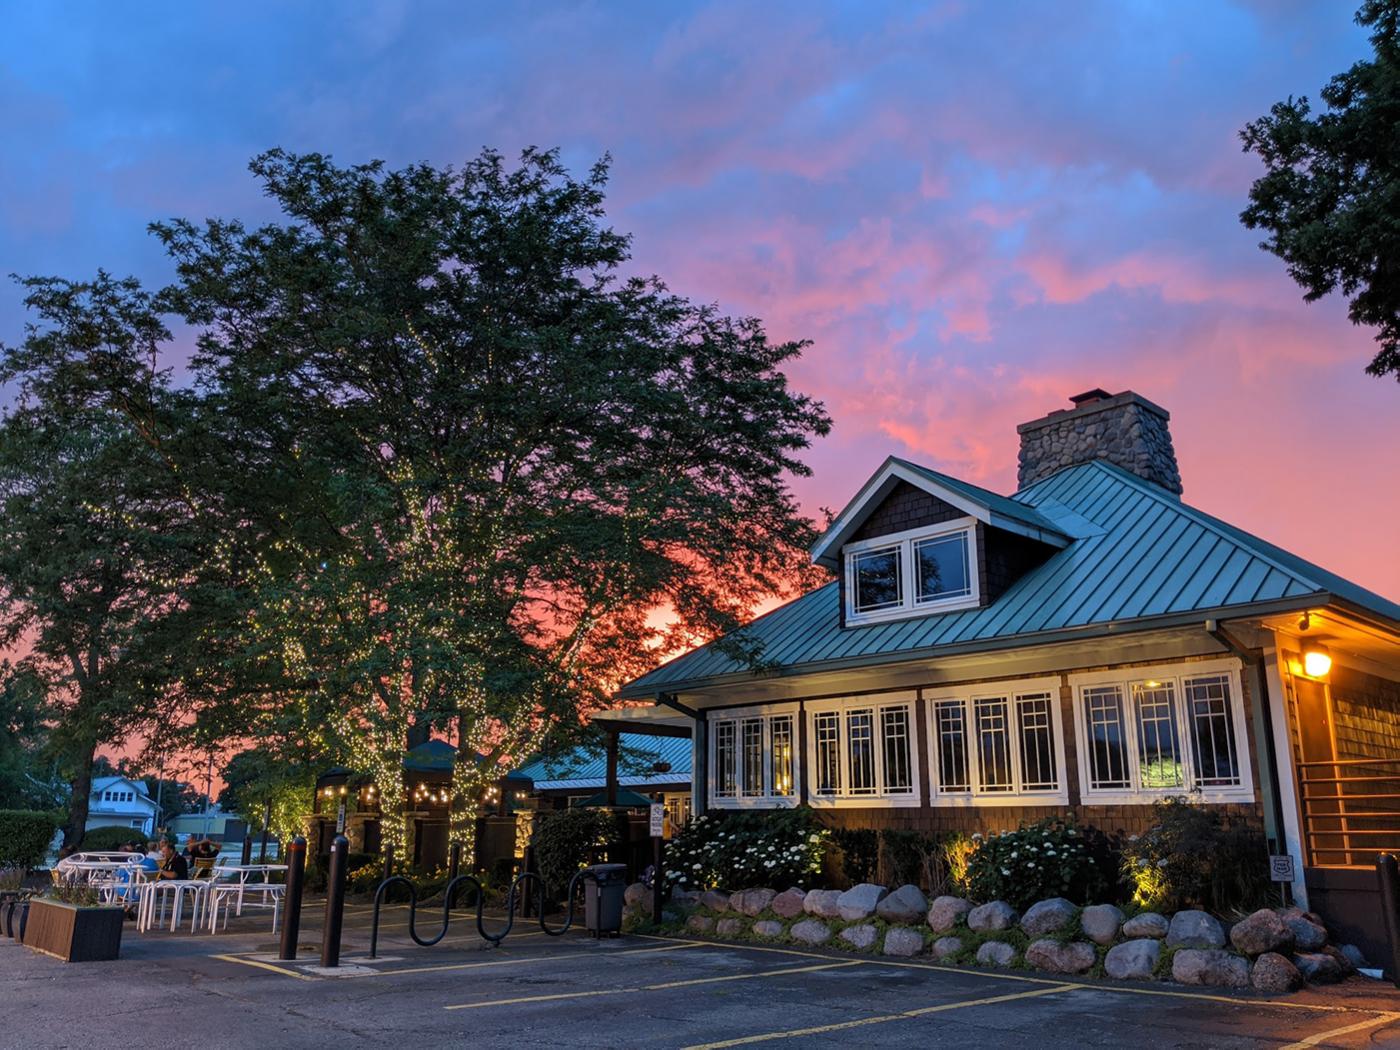 The Olympic Tavern in Rockford, Illinois at sunset